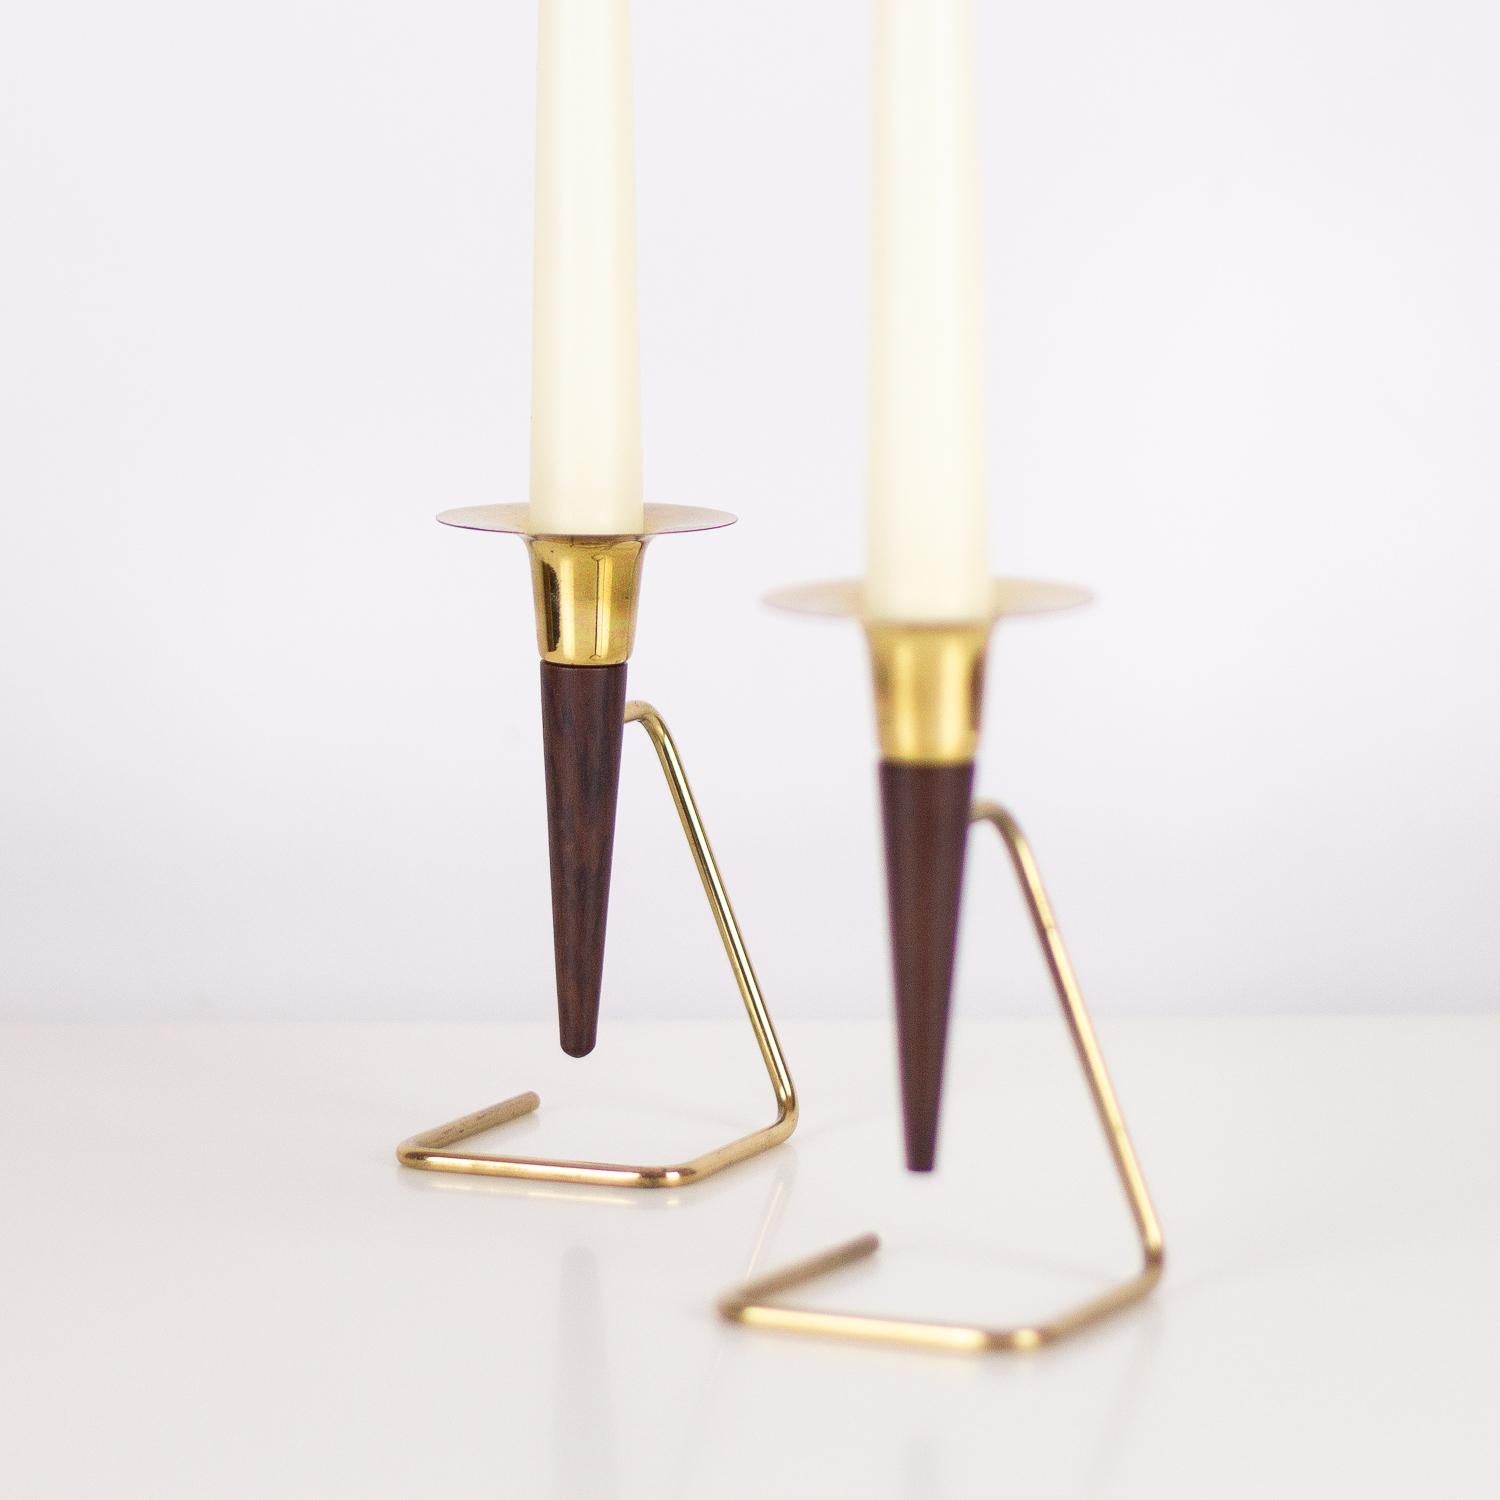 Danish Pair of Brass and Rosewood Candlesticks, Denmark, 1960s